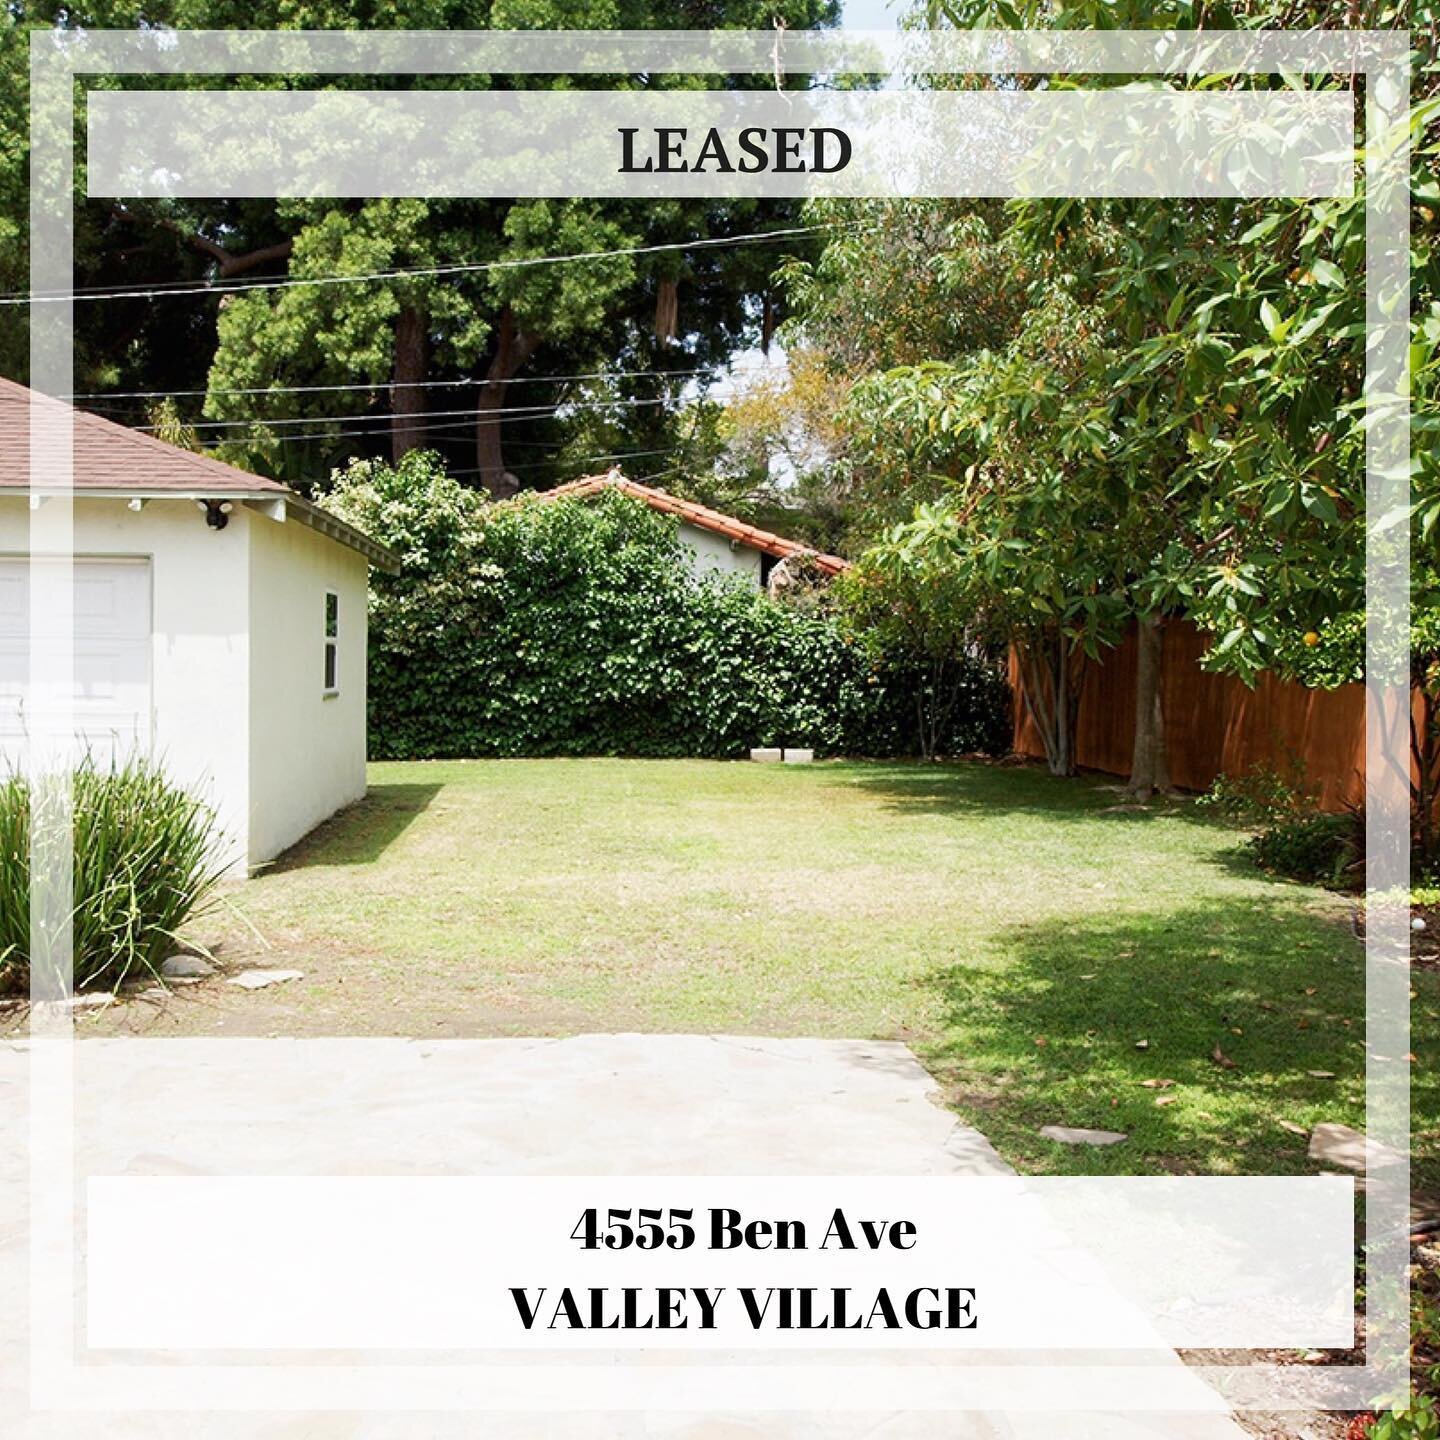 #Leased after only 1 week on the market!! 4555 Ben Ave, Valley Village - leased at $3,850 - 2 BED | 1 BA | 1,258 sf | 6,750 lot